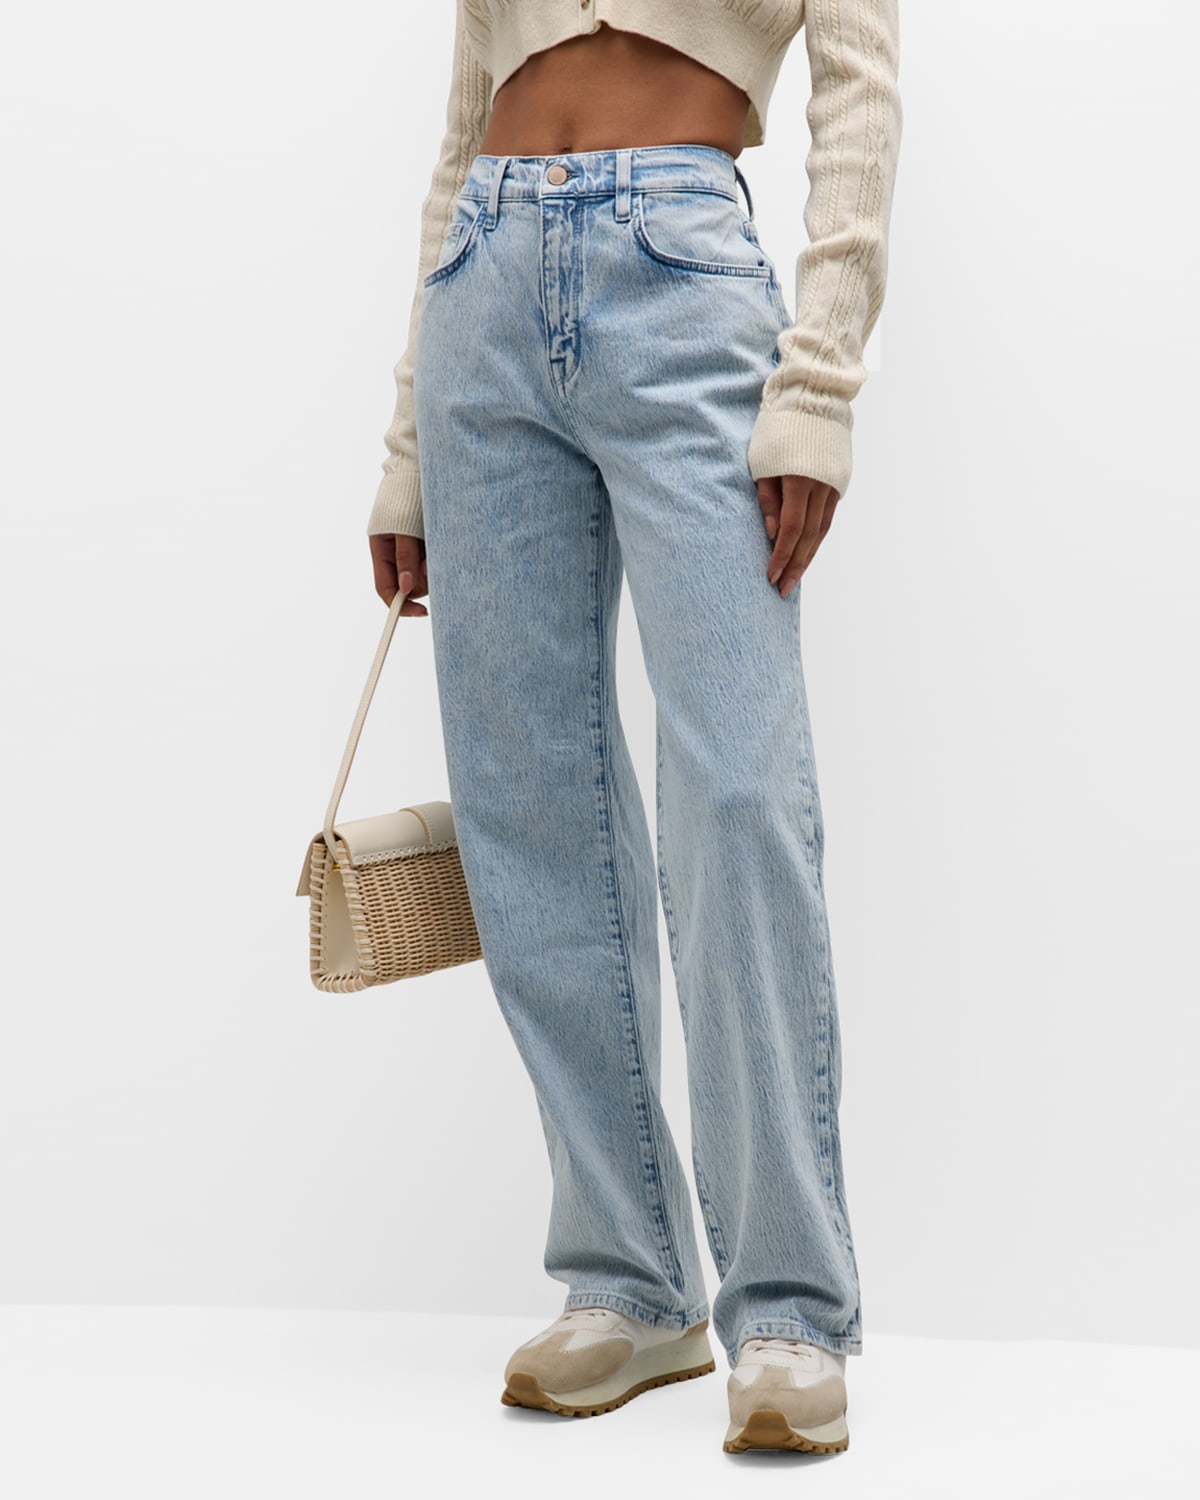 TRIARCHY MS. KEATON HIGH RISE BAGGY JEANS